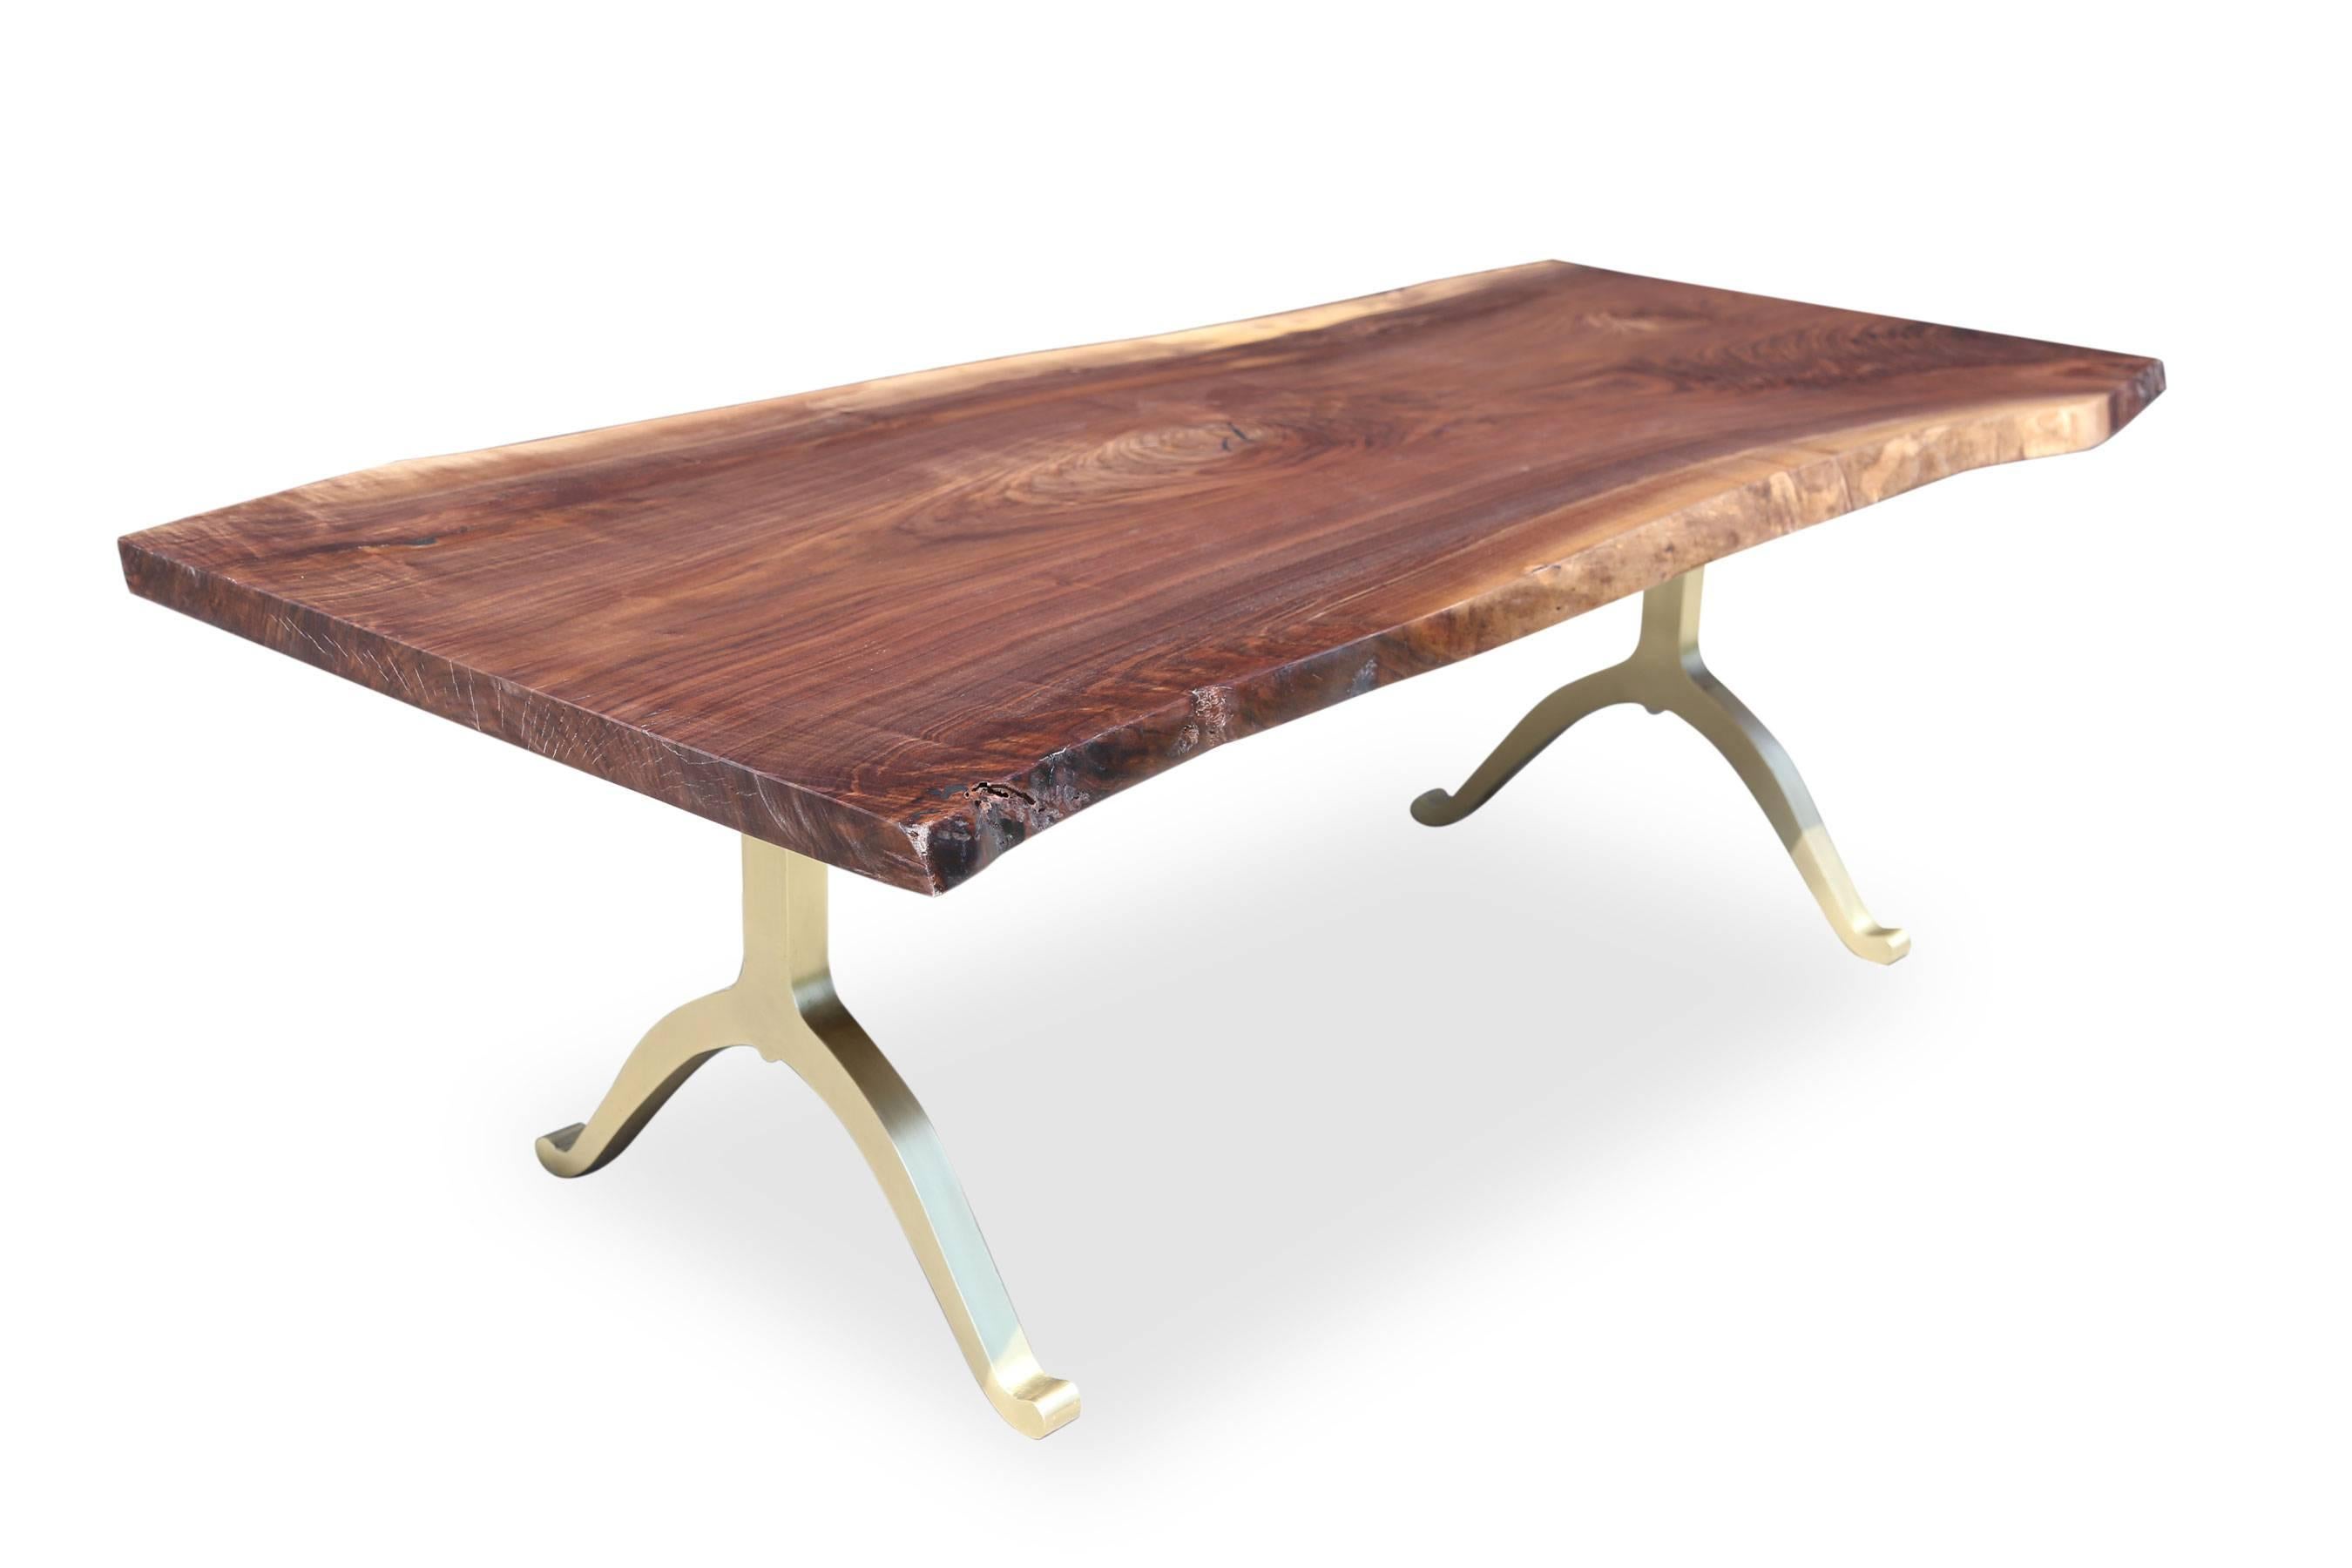 Solid American black walnut live edge tabletop paired with our solid brass wishbone legs. 

Our tables let the walnut grain speak for itself with a durable clear coat finish over the wood with no stain. Our work has been featured in some of the most